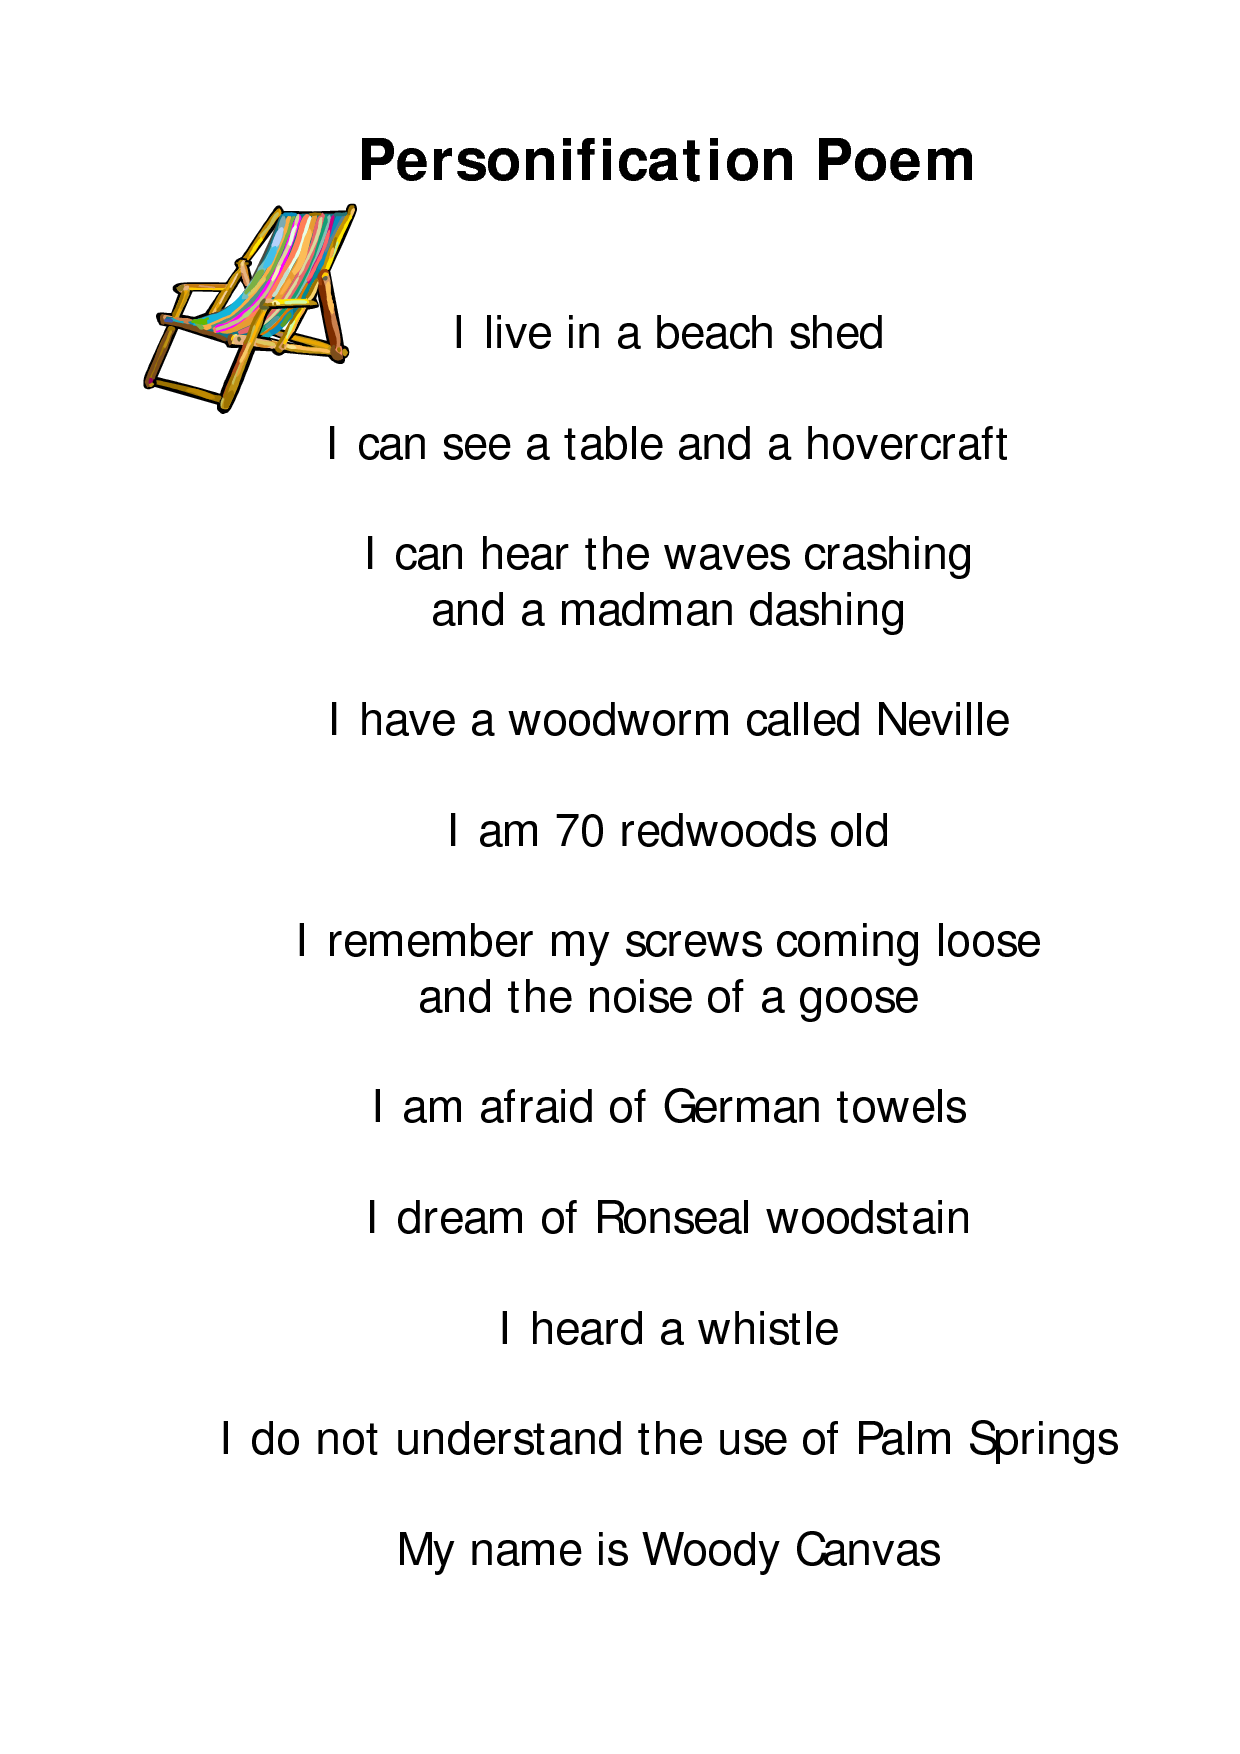 personification poem examples for students